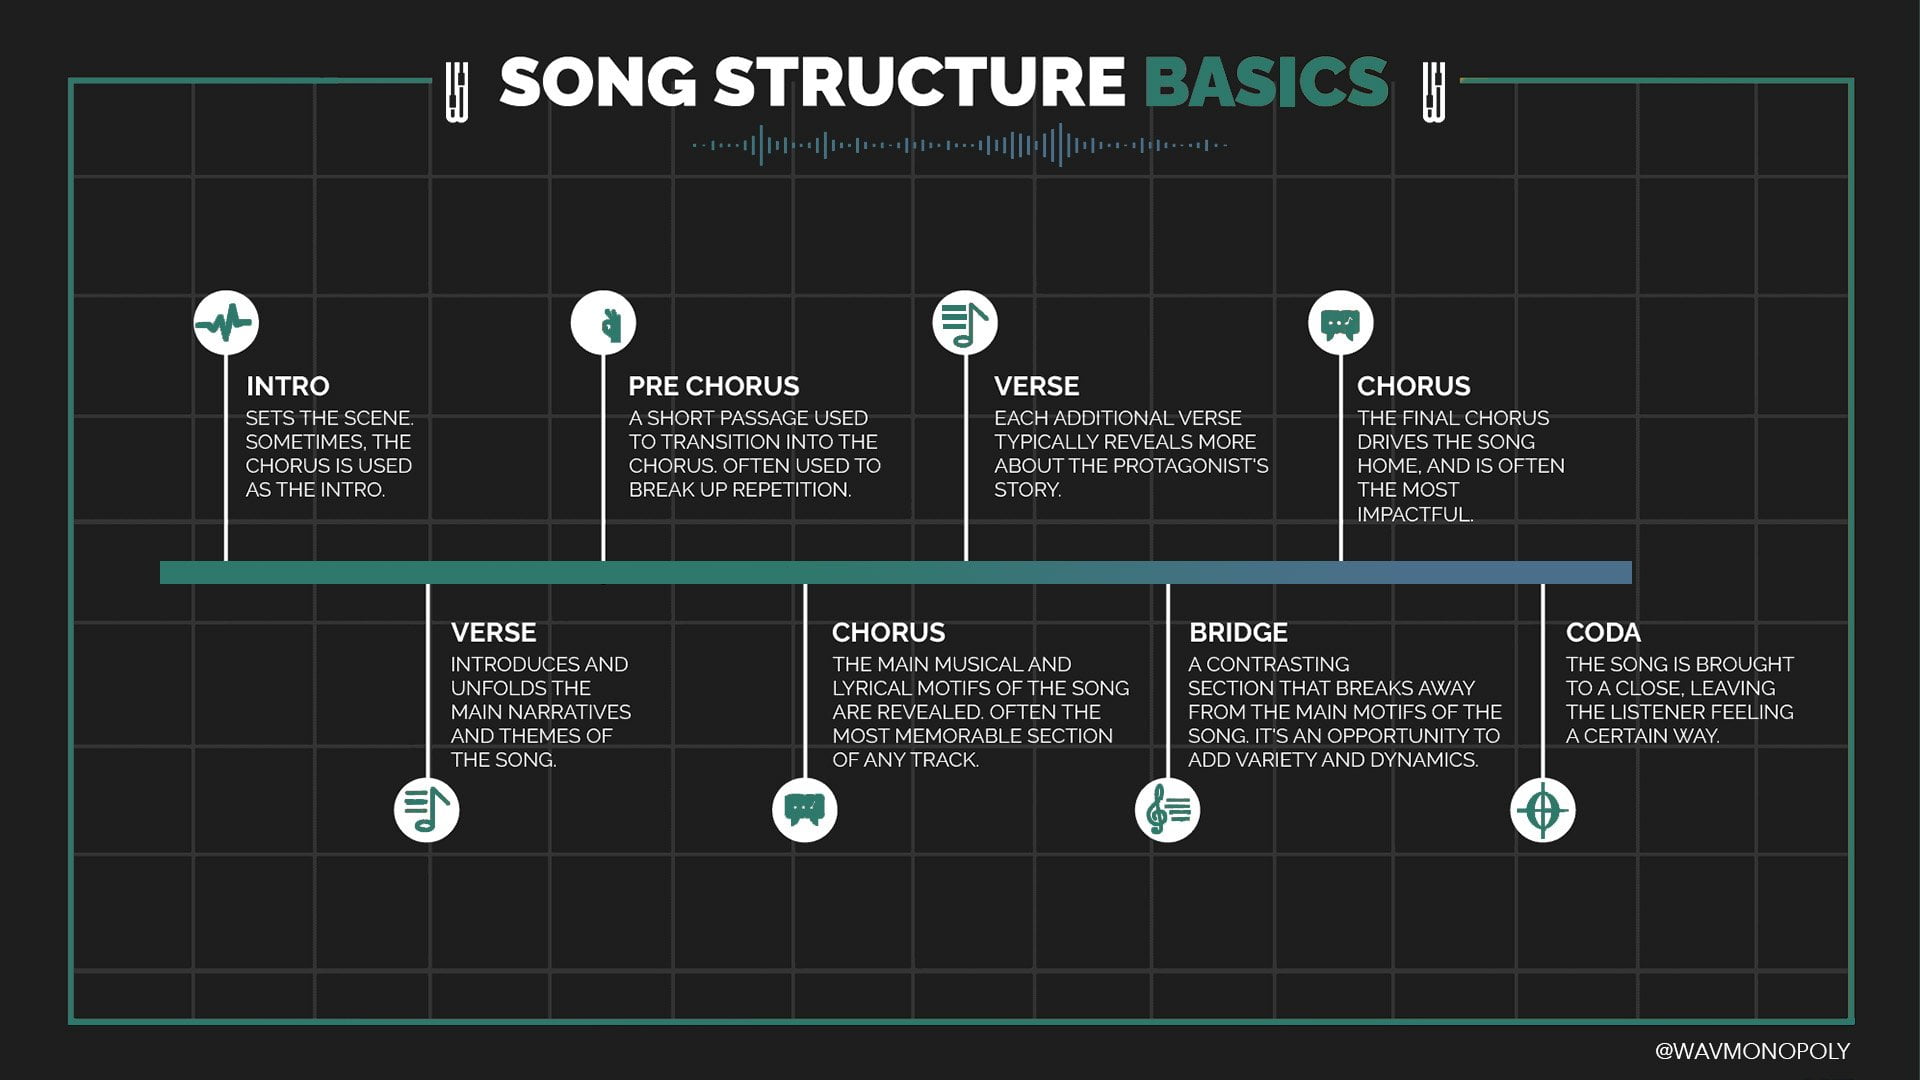 Song structure basics